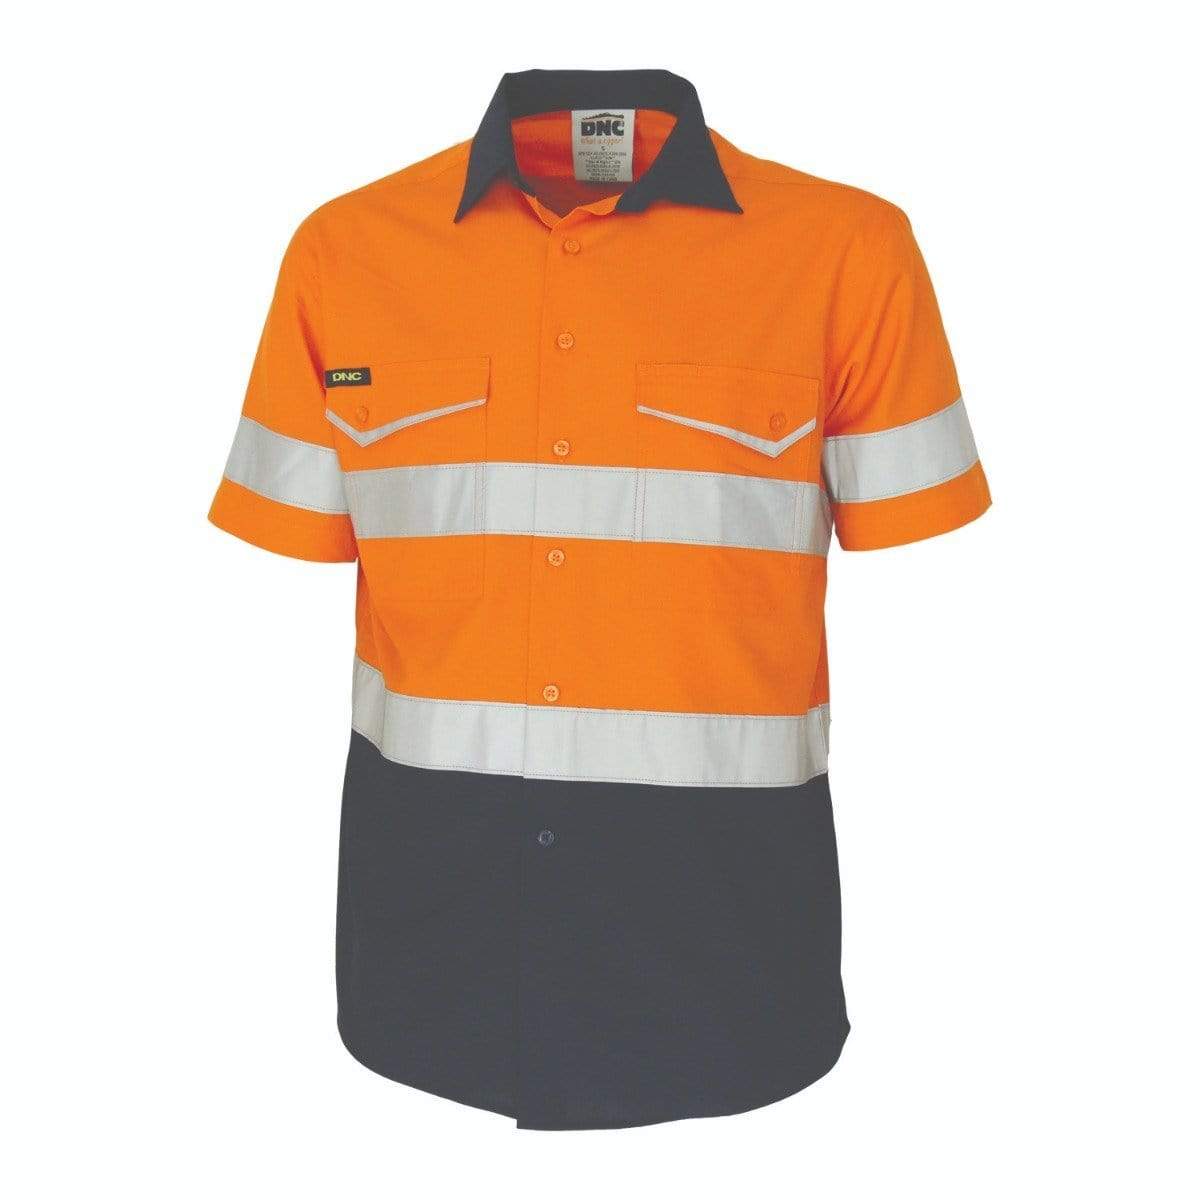 DNC Workwear Work Wear DNC WORKWEAR Two-Tone Ripstop Cotton Short Sleeve Shirt with CSR Reflective Tape 3587